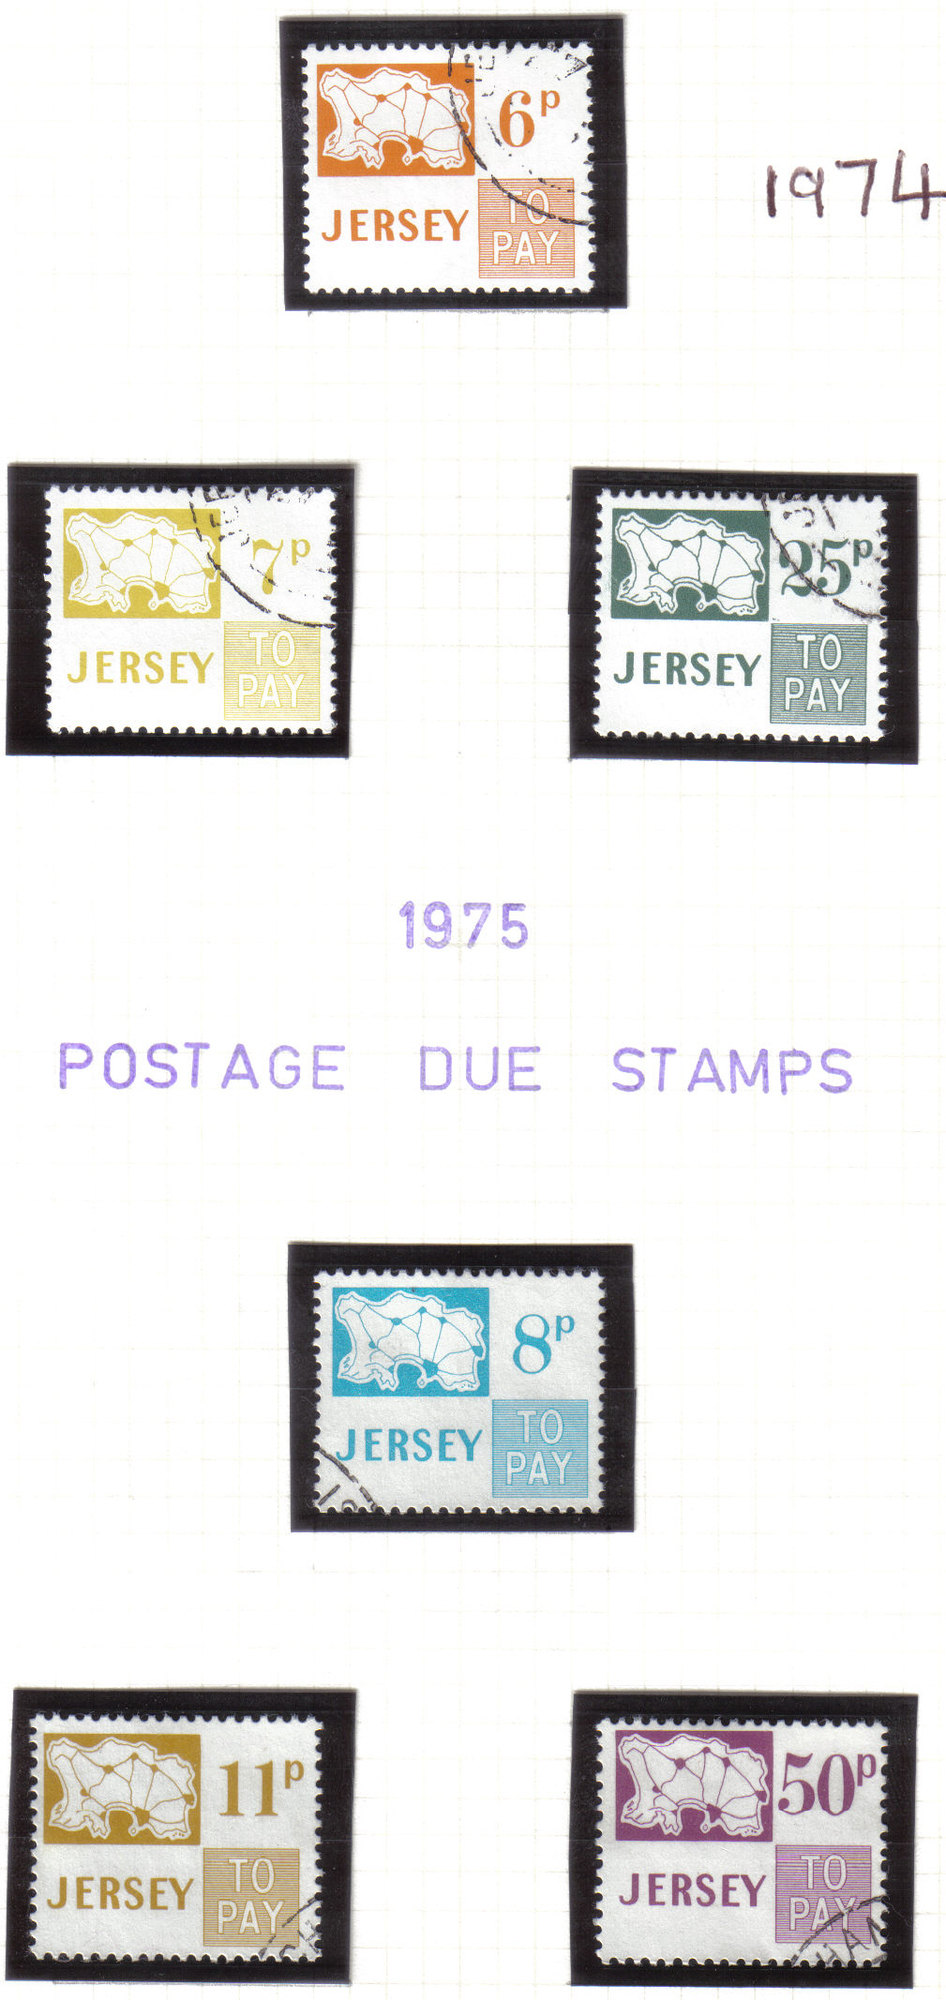 Jersey Stamps 1974-75  Post Due - CTO USED (z539)